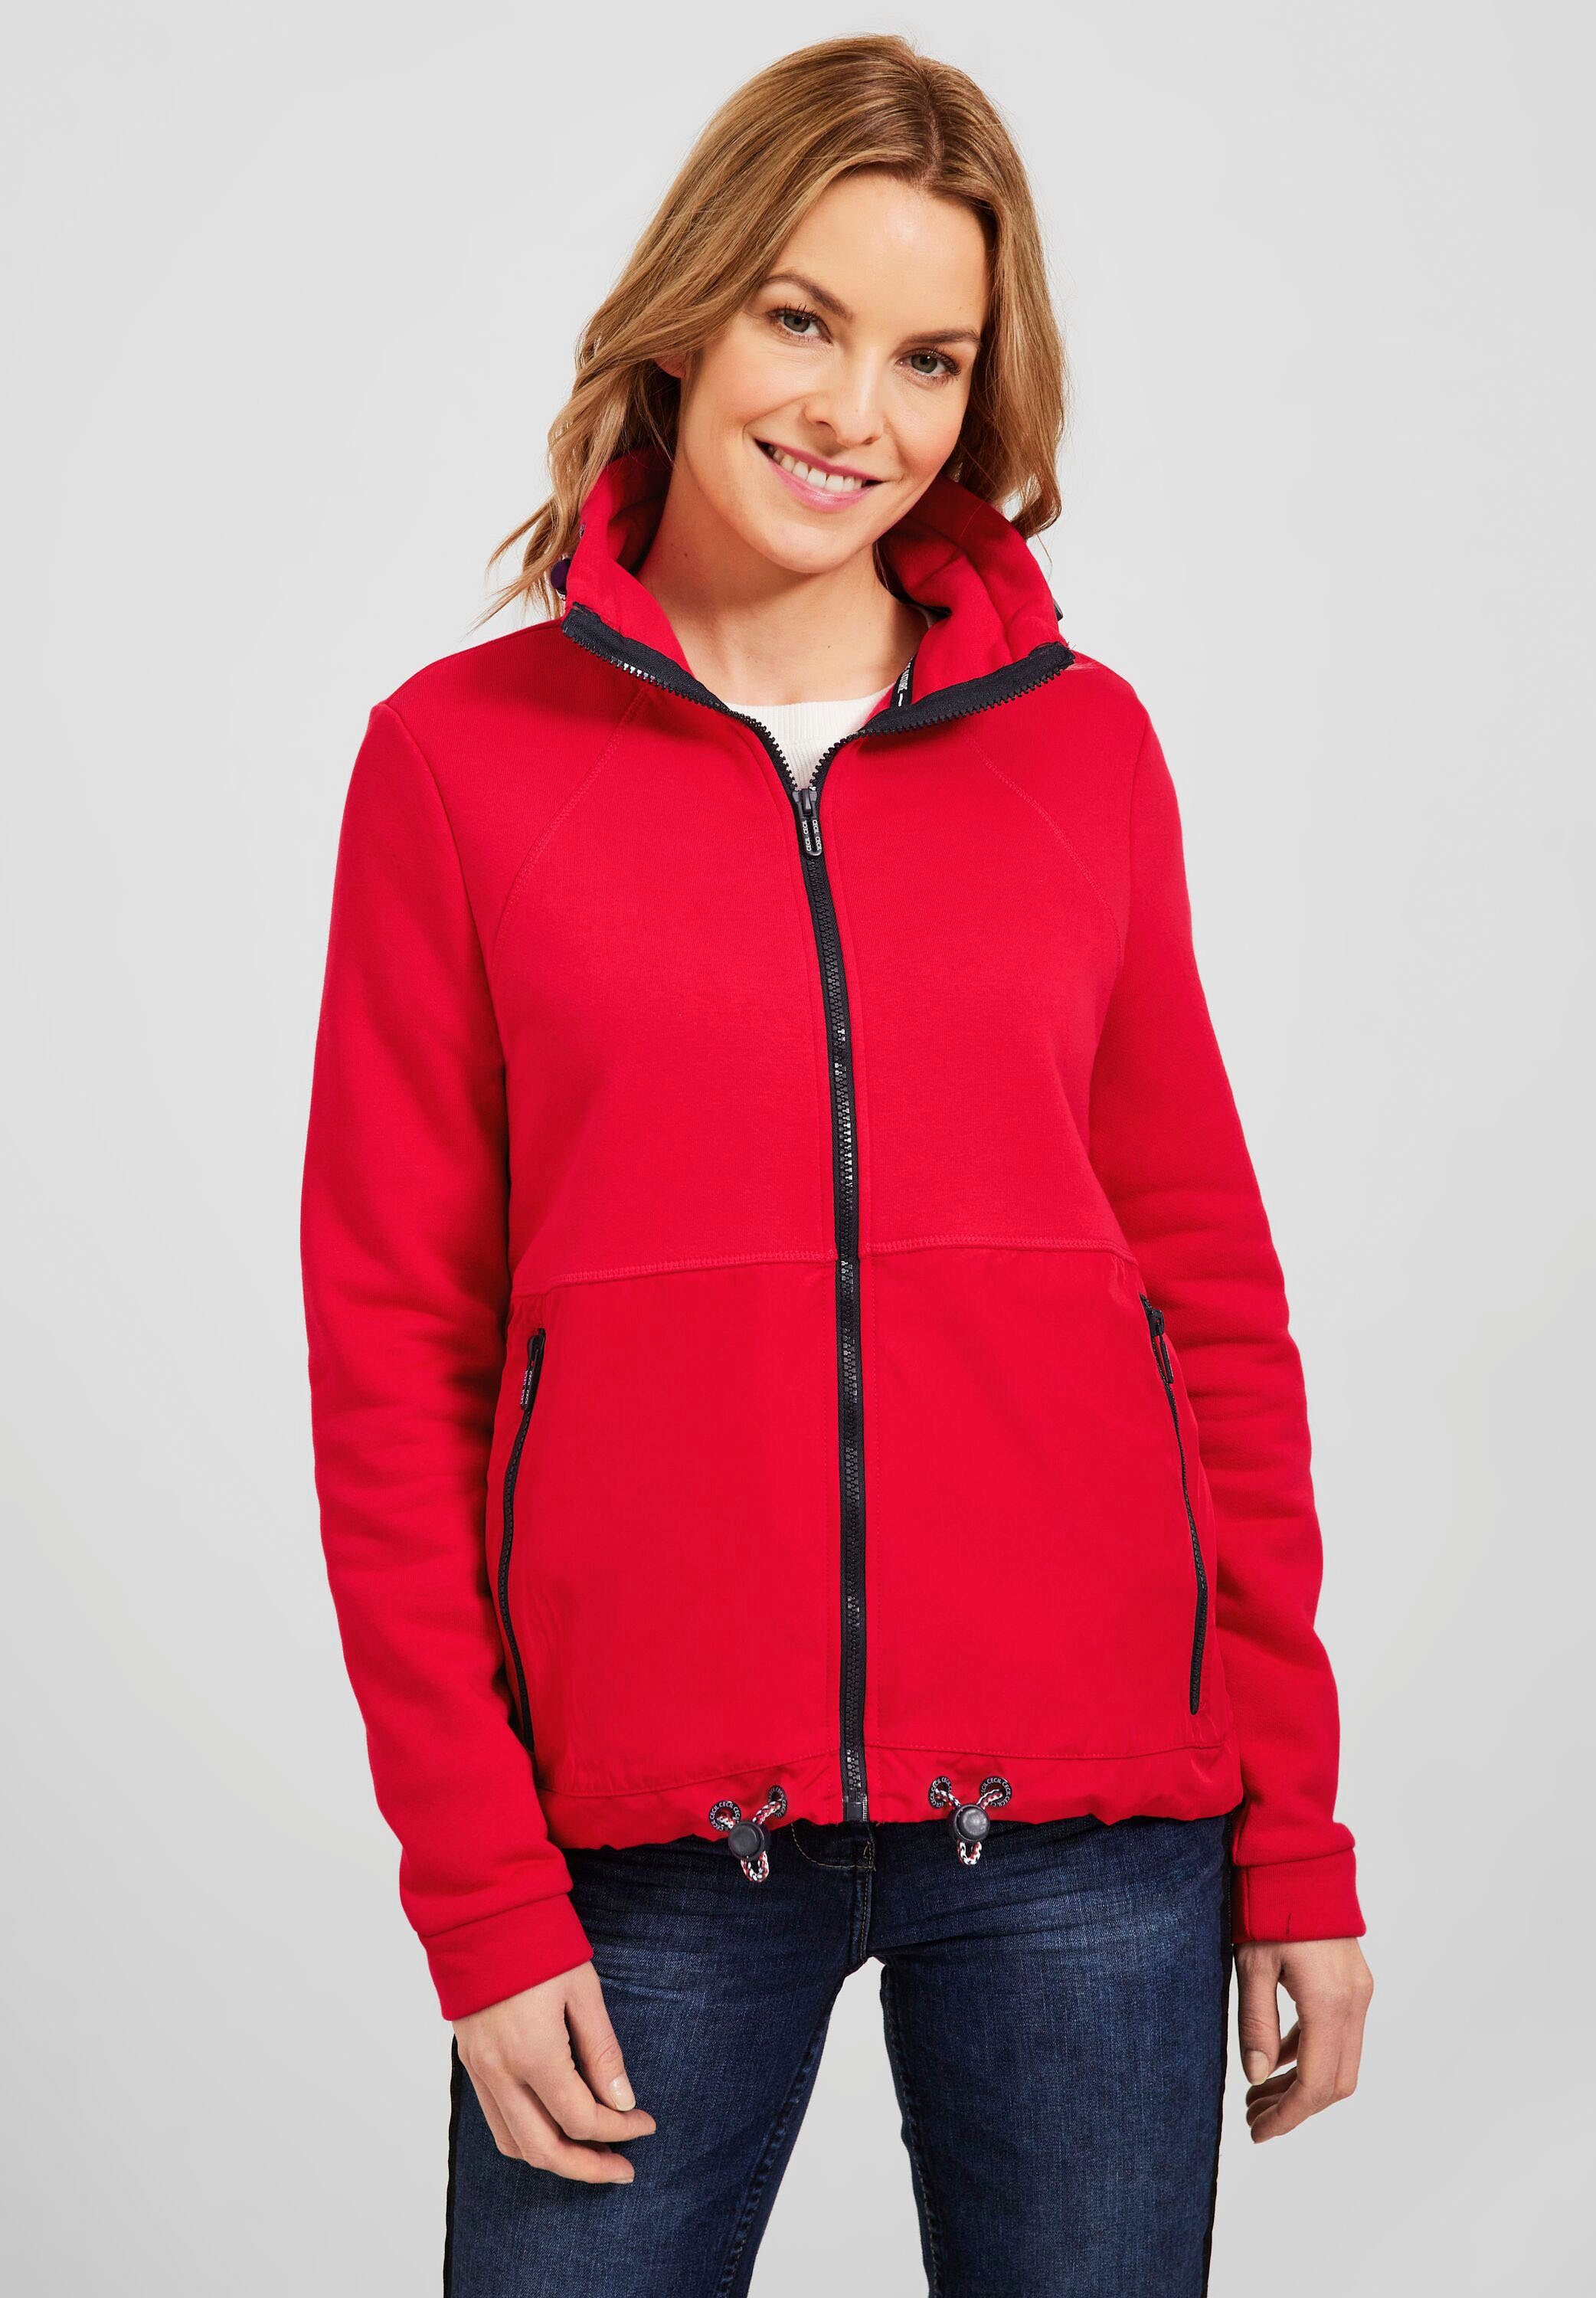 red modernen strong Cecil Materialmix im Sweatjacke